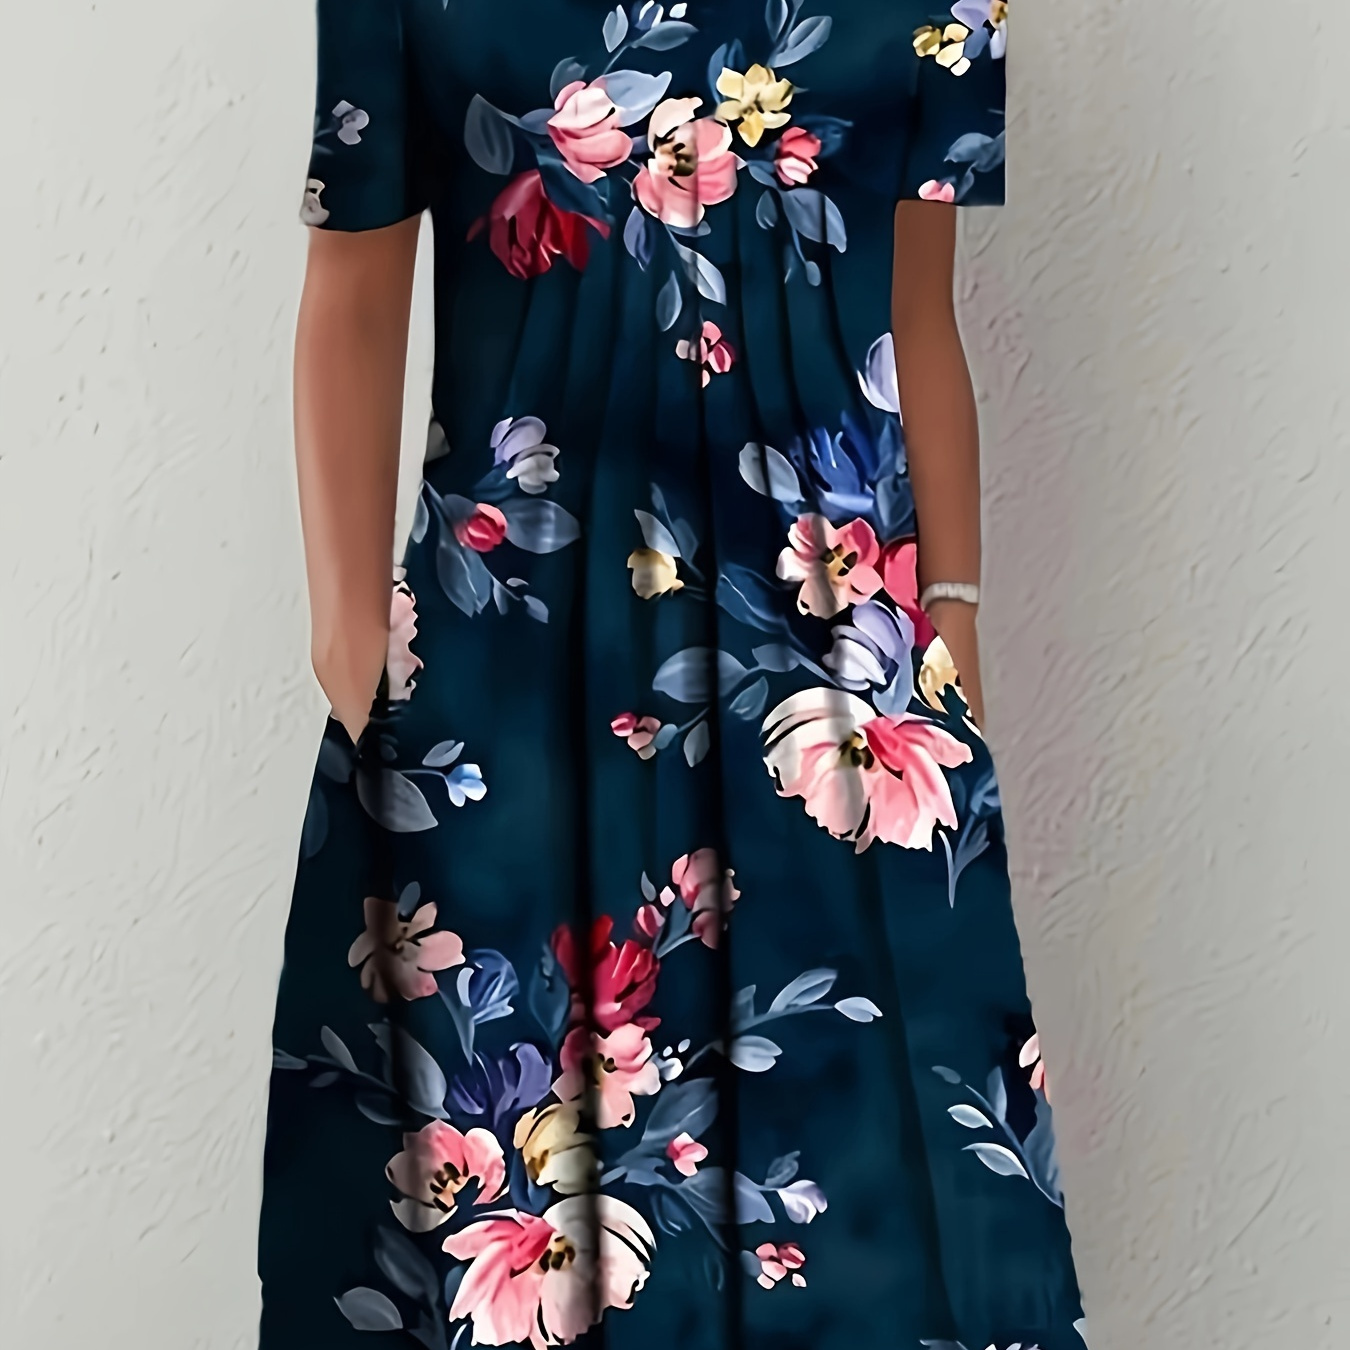 

Floral Print With Pocket Dress, Casual Short Sleeve Dress For Spring & Summer, Women's Clothing